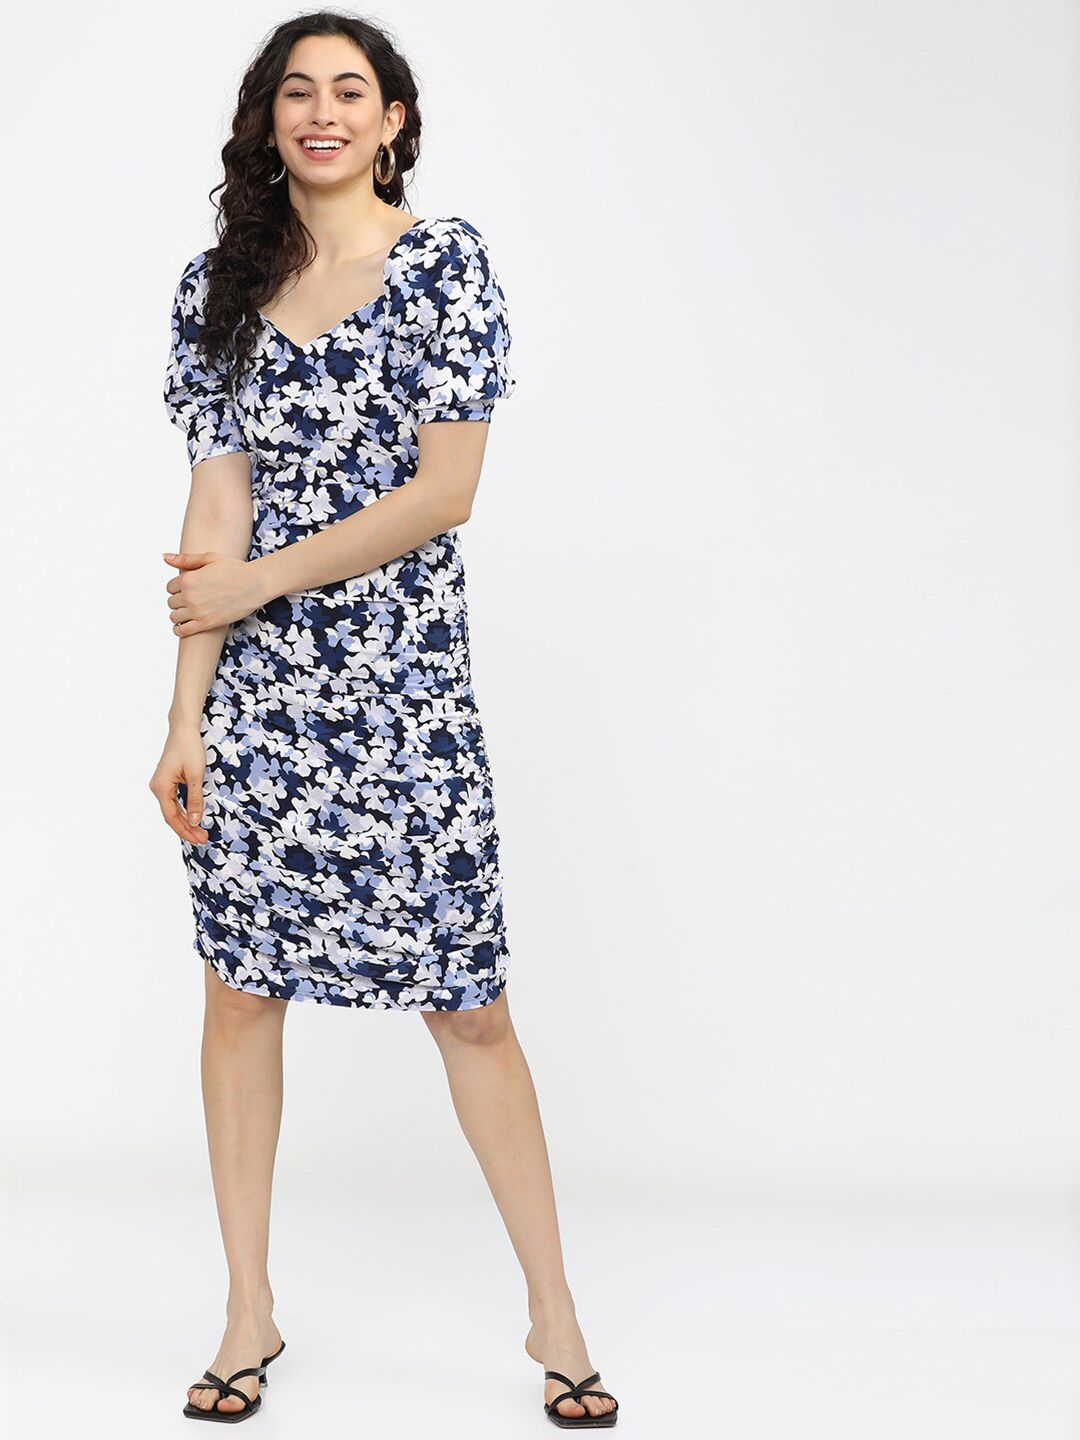 Tokyo Talkies Blue & White Floral A-Line Dress Price in India